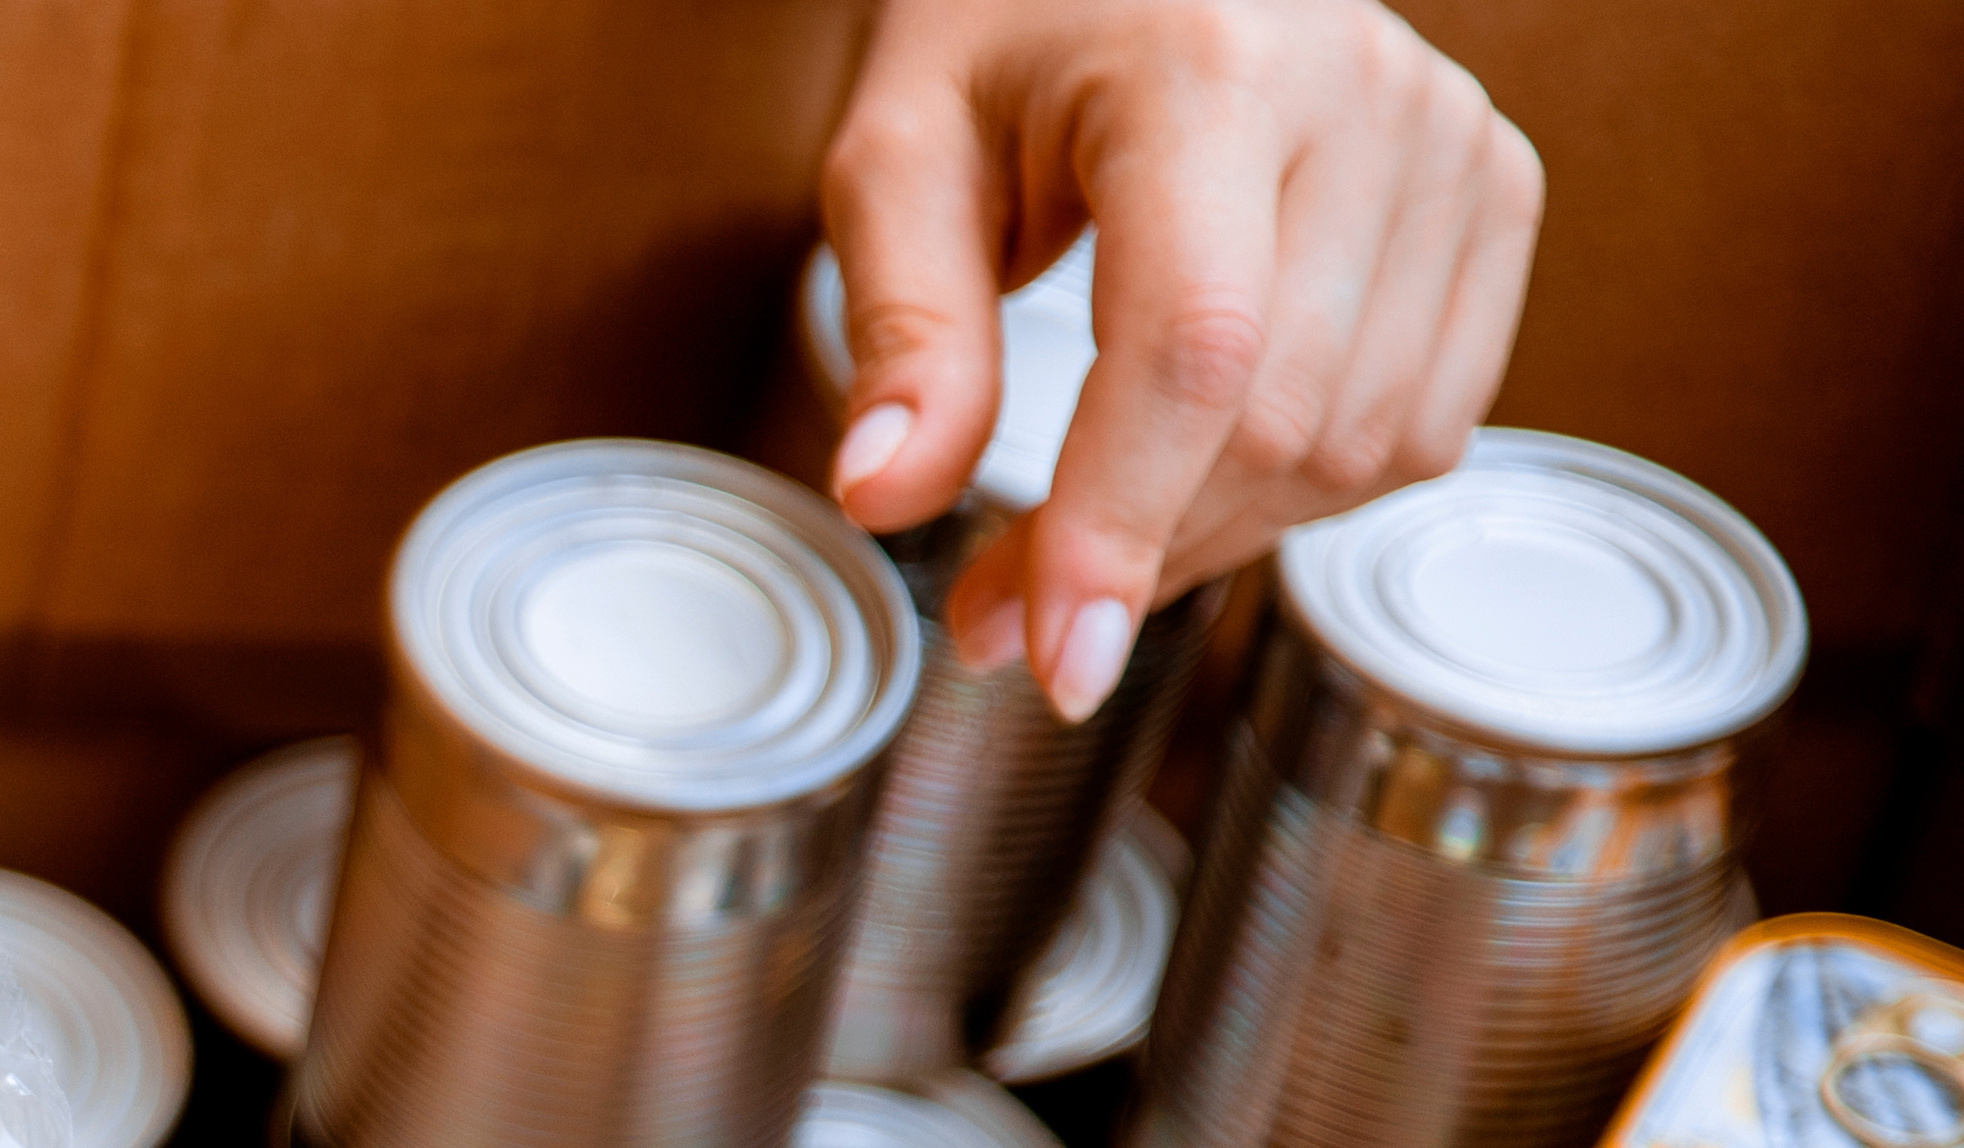 We're collecting canned food at 54 library locations to help fight hunger and feed our neighbors.